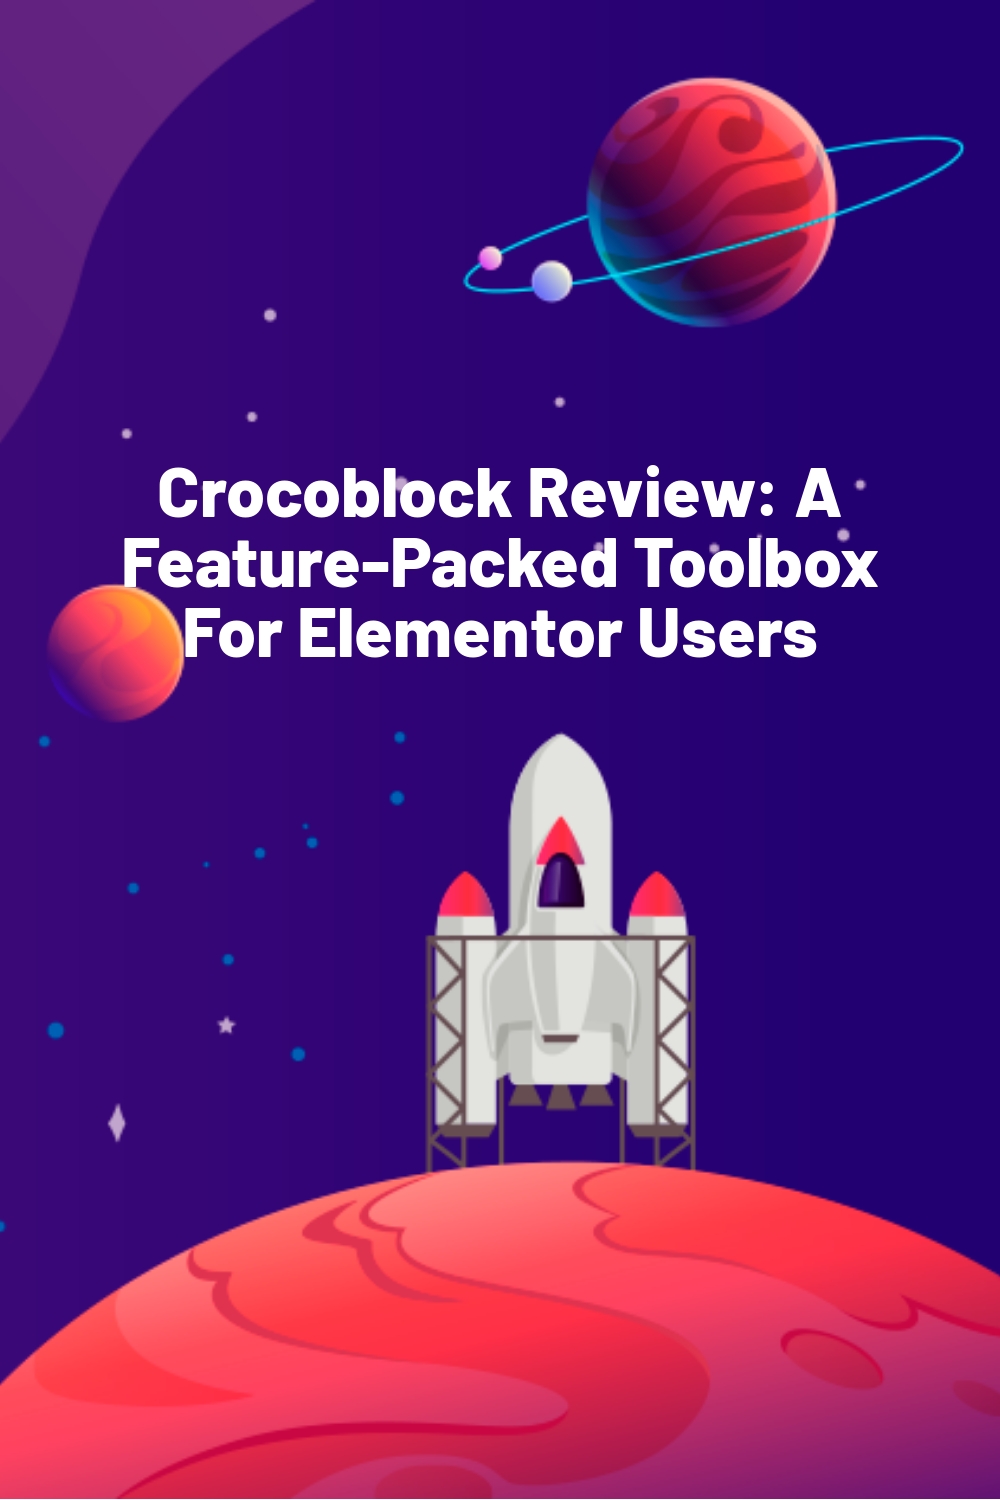 Crocoblock Review: A Feature-Packed Toolbox For Elementor Users